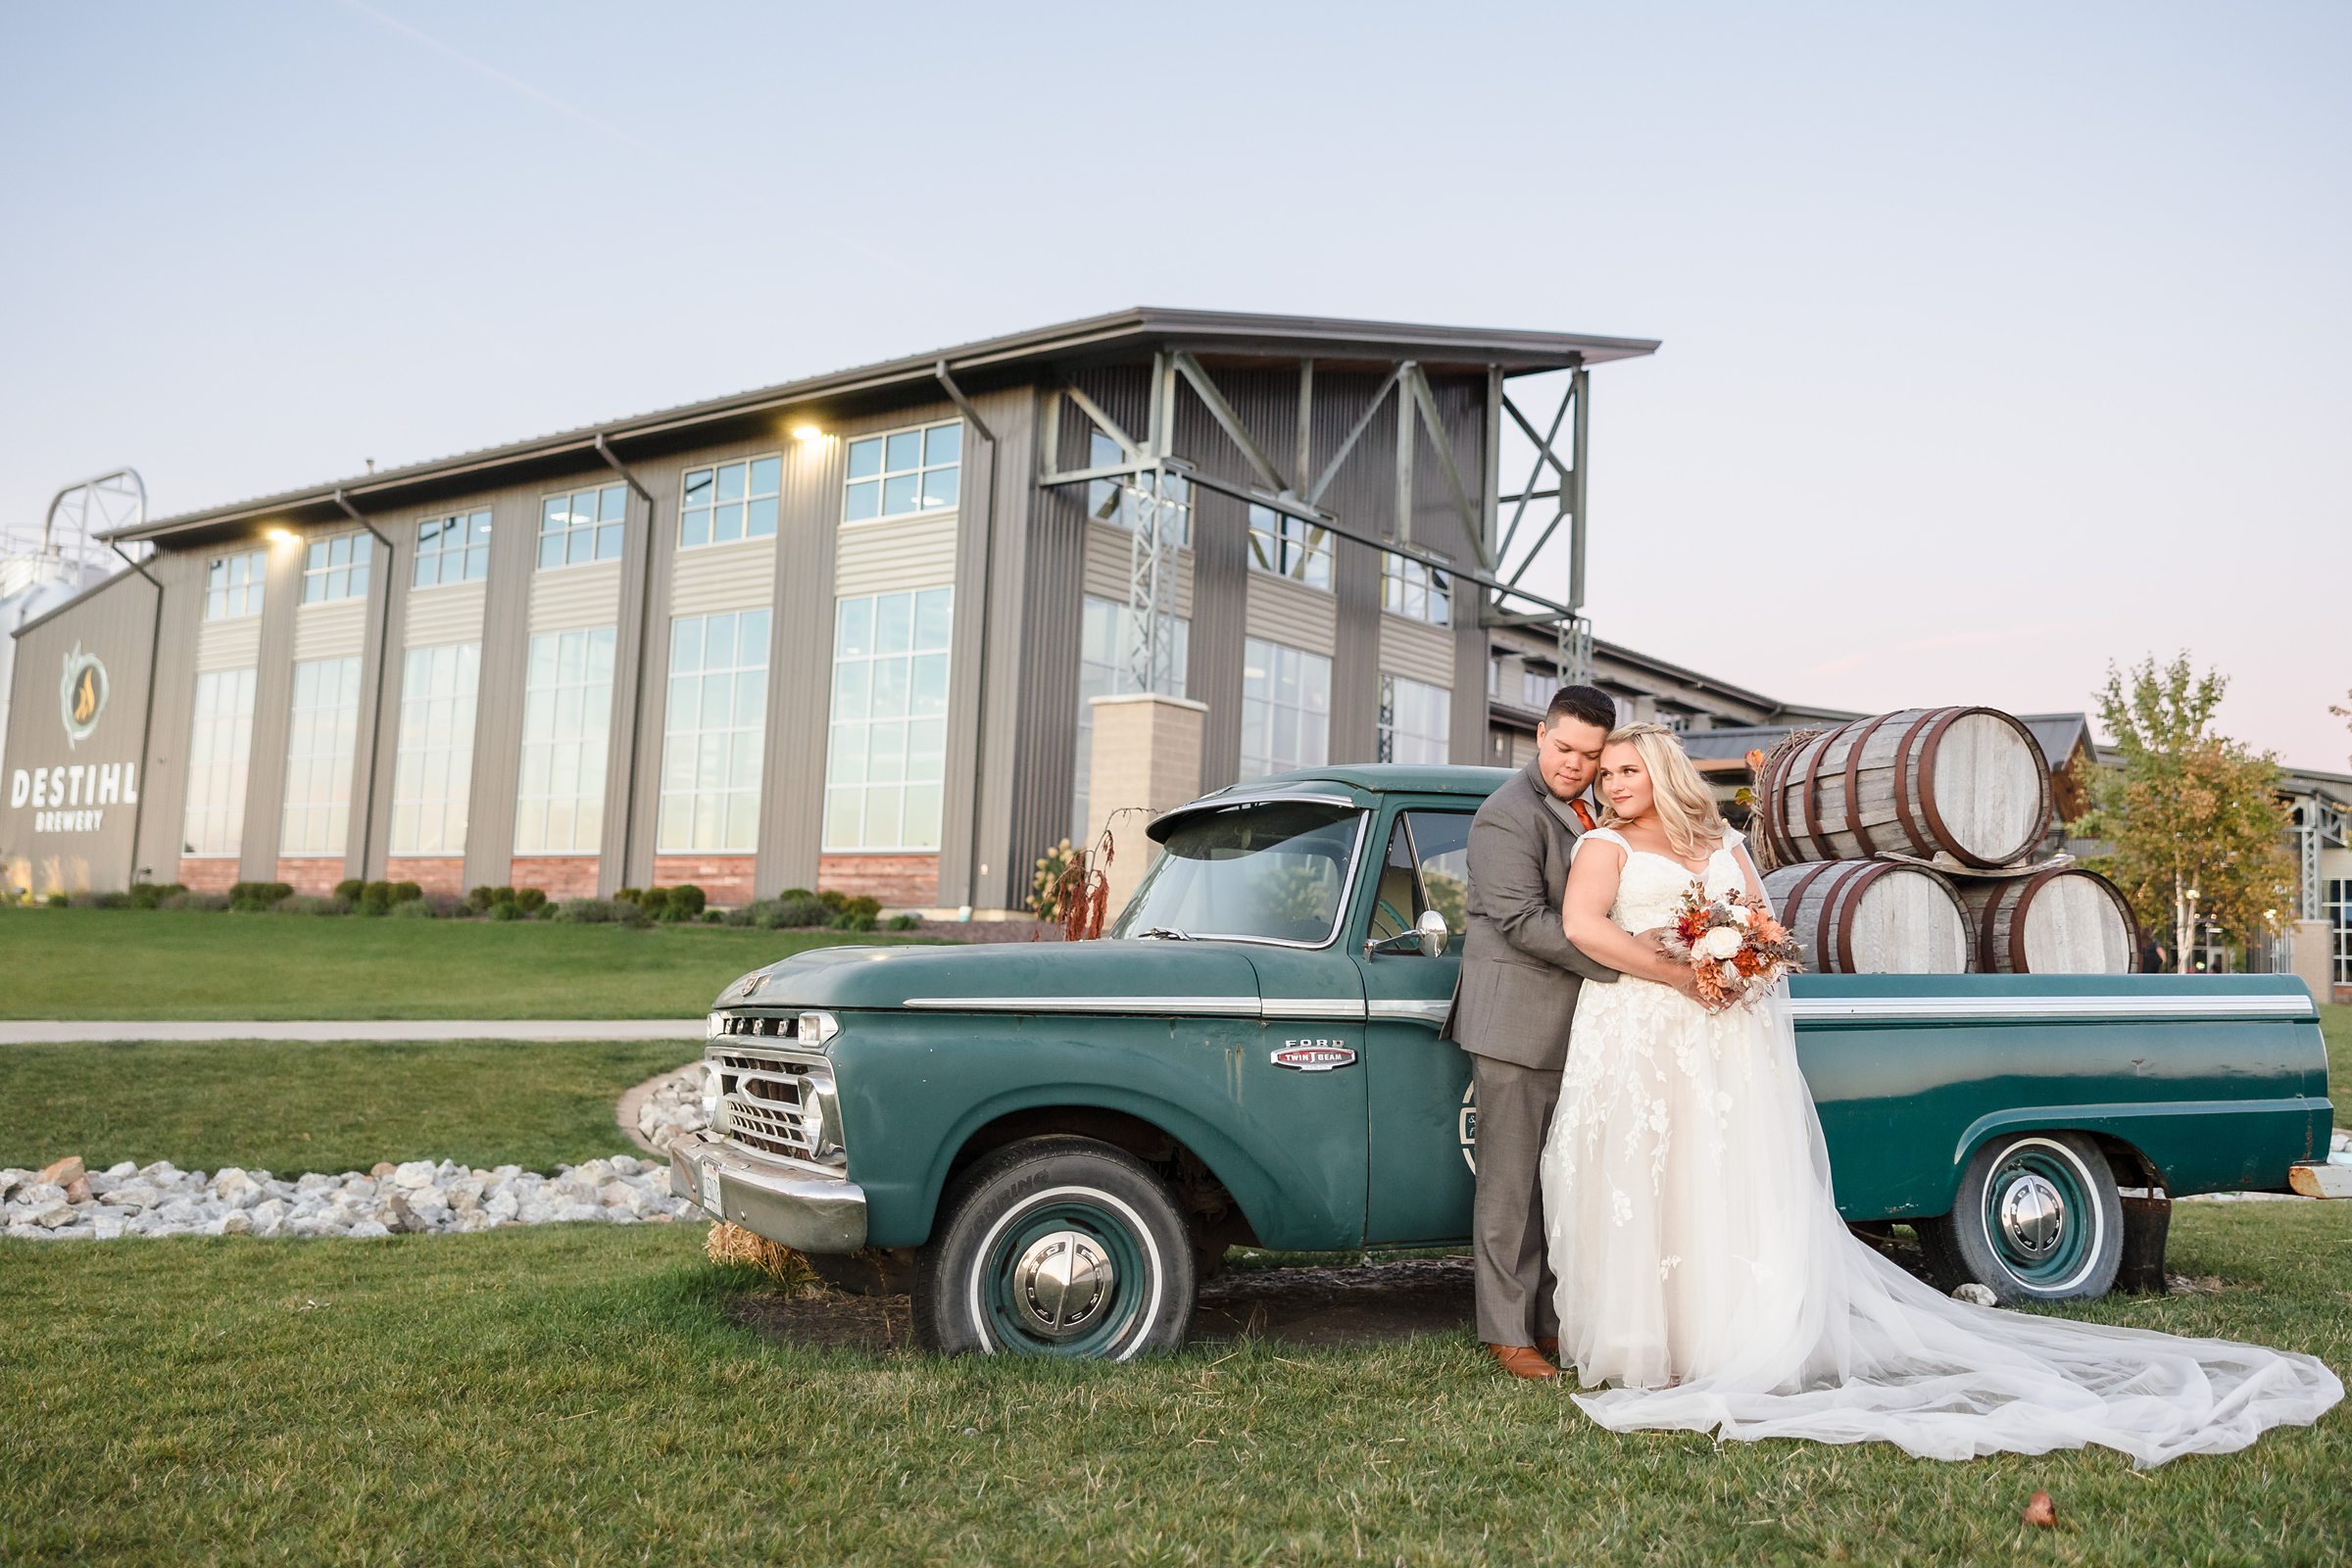 Bride and groom celebrate getting married during their wedding at the Destihl Brewery in Normal, Illinois.